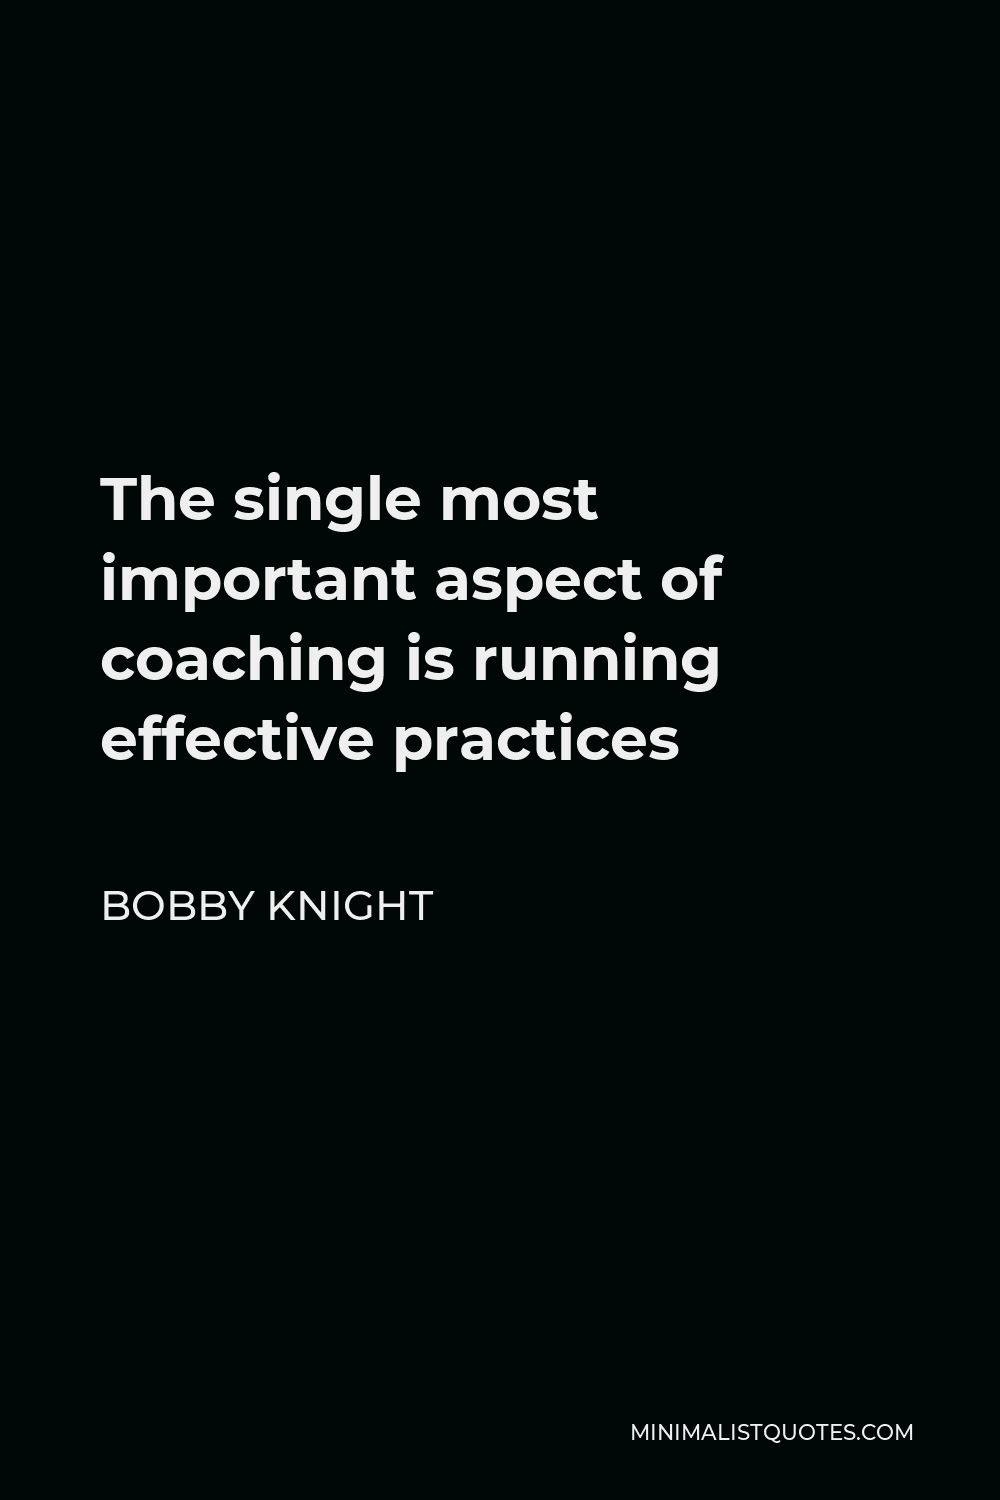 Bobby Knight Quote - The single most important aspect of coaching is running effective practices